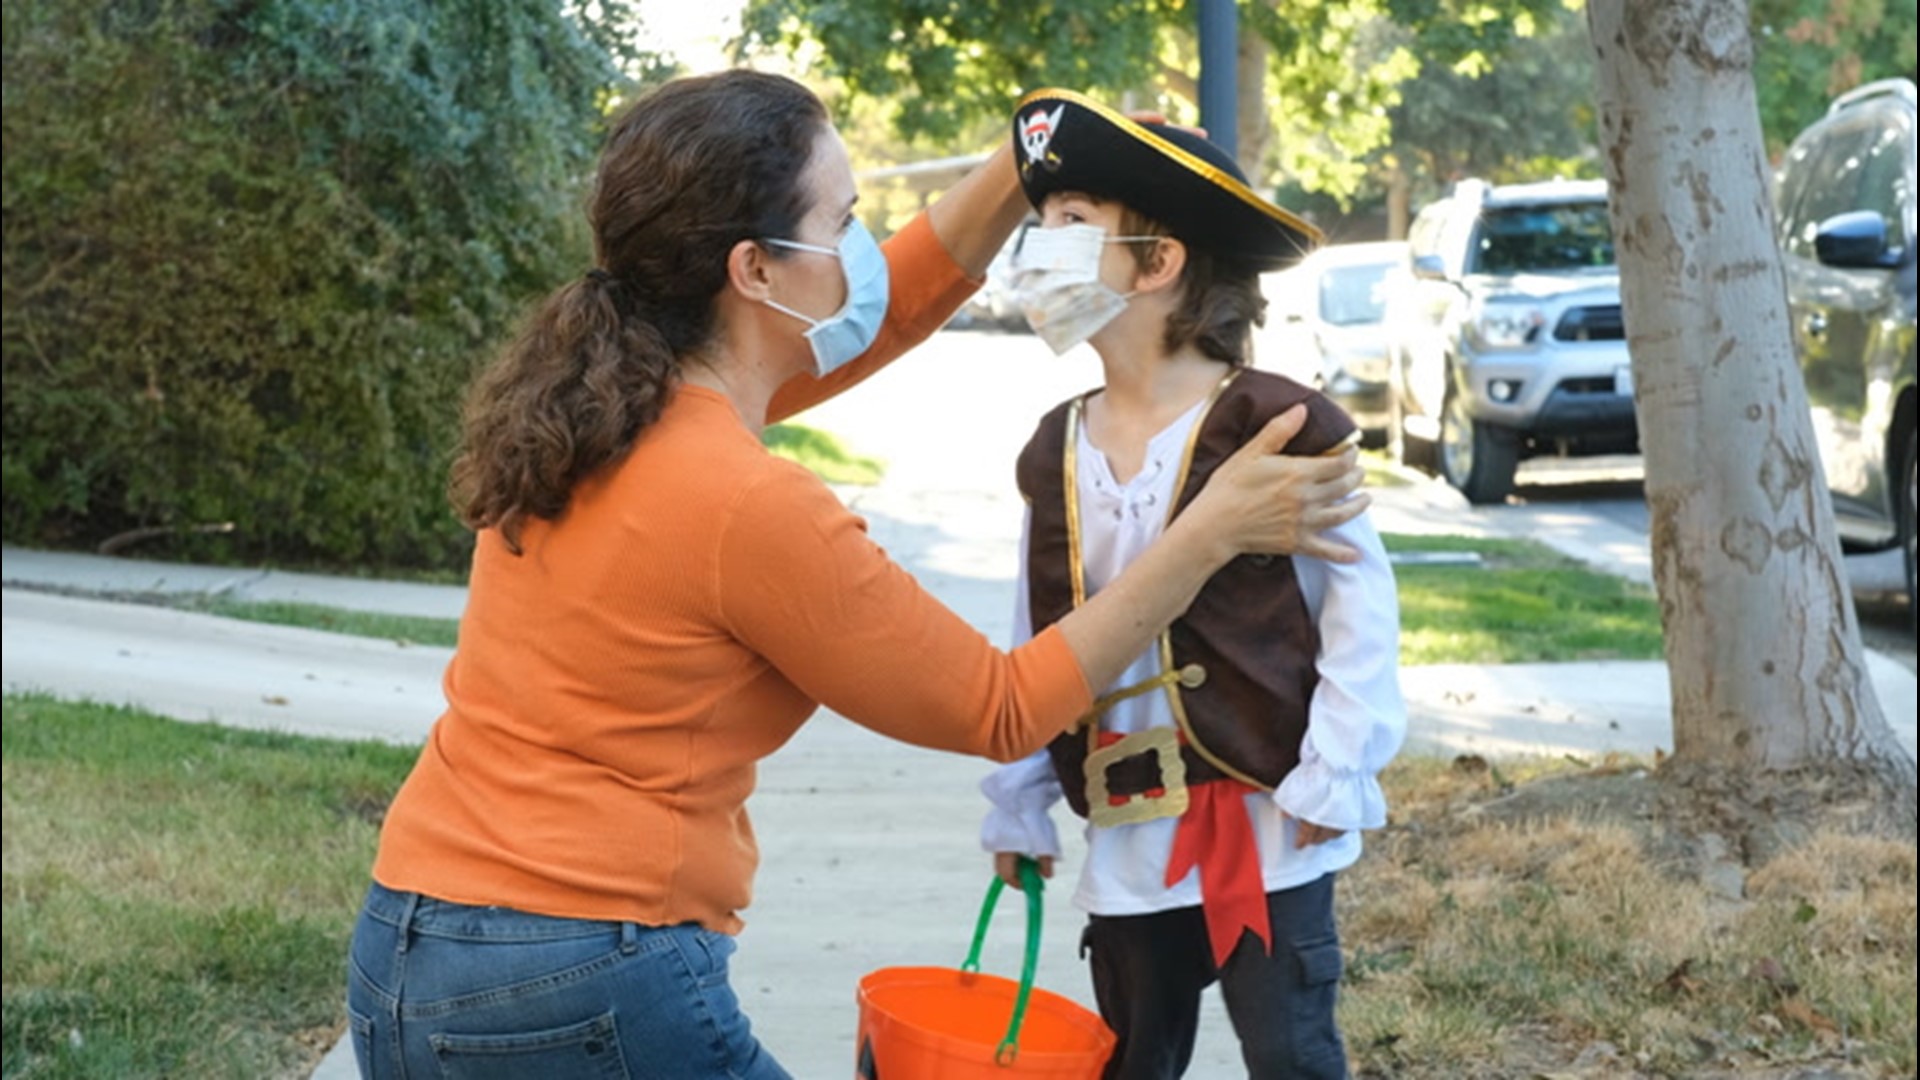 Halloween is upon us, but your trick or treating could be ruined by unexpected cold or severe weather. Here's how to prepare for the weather before you trick or treat.